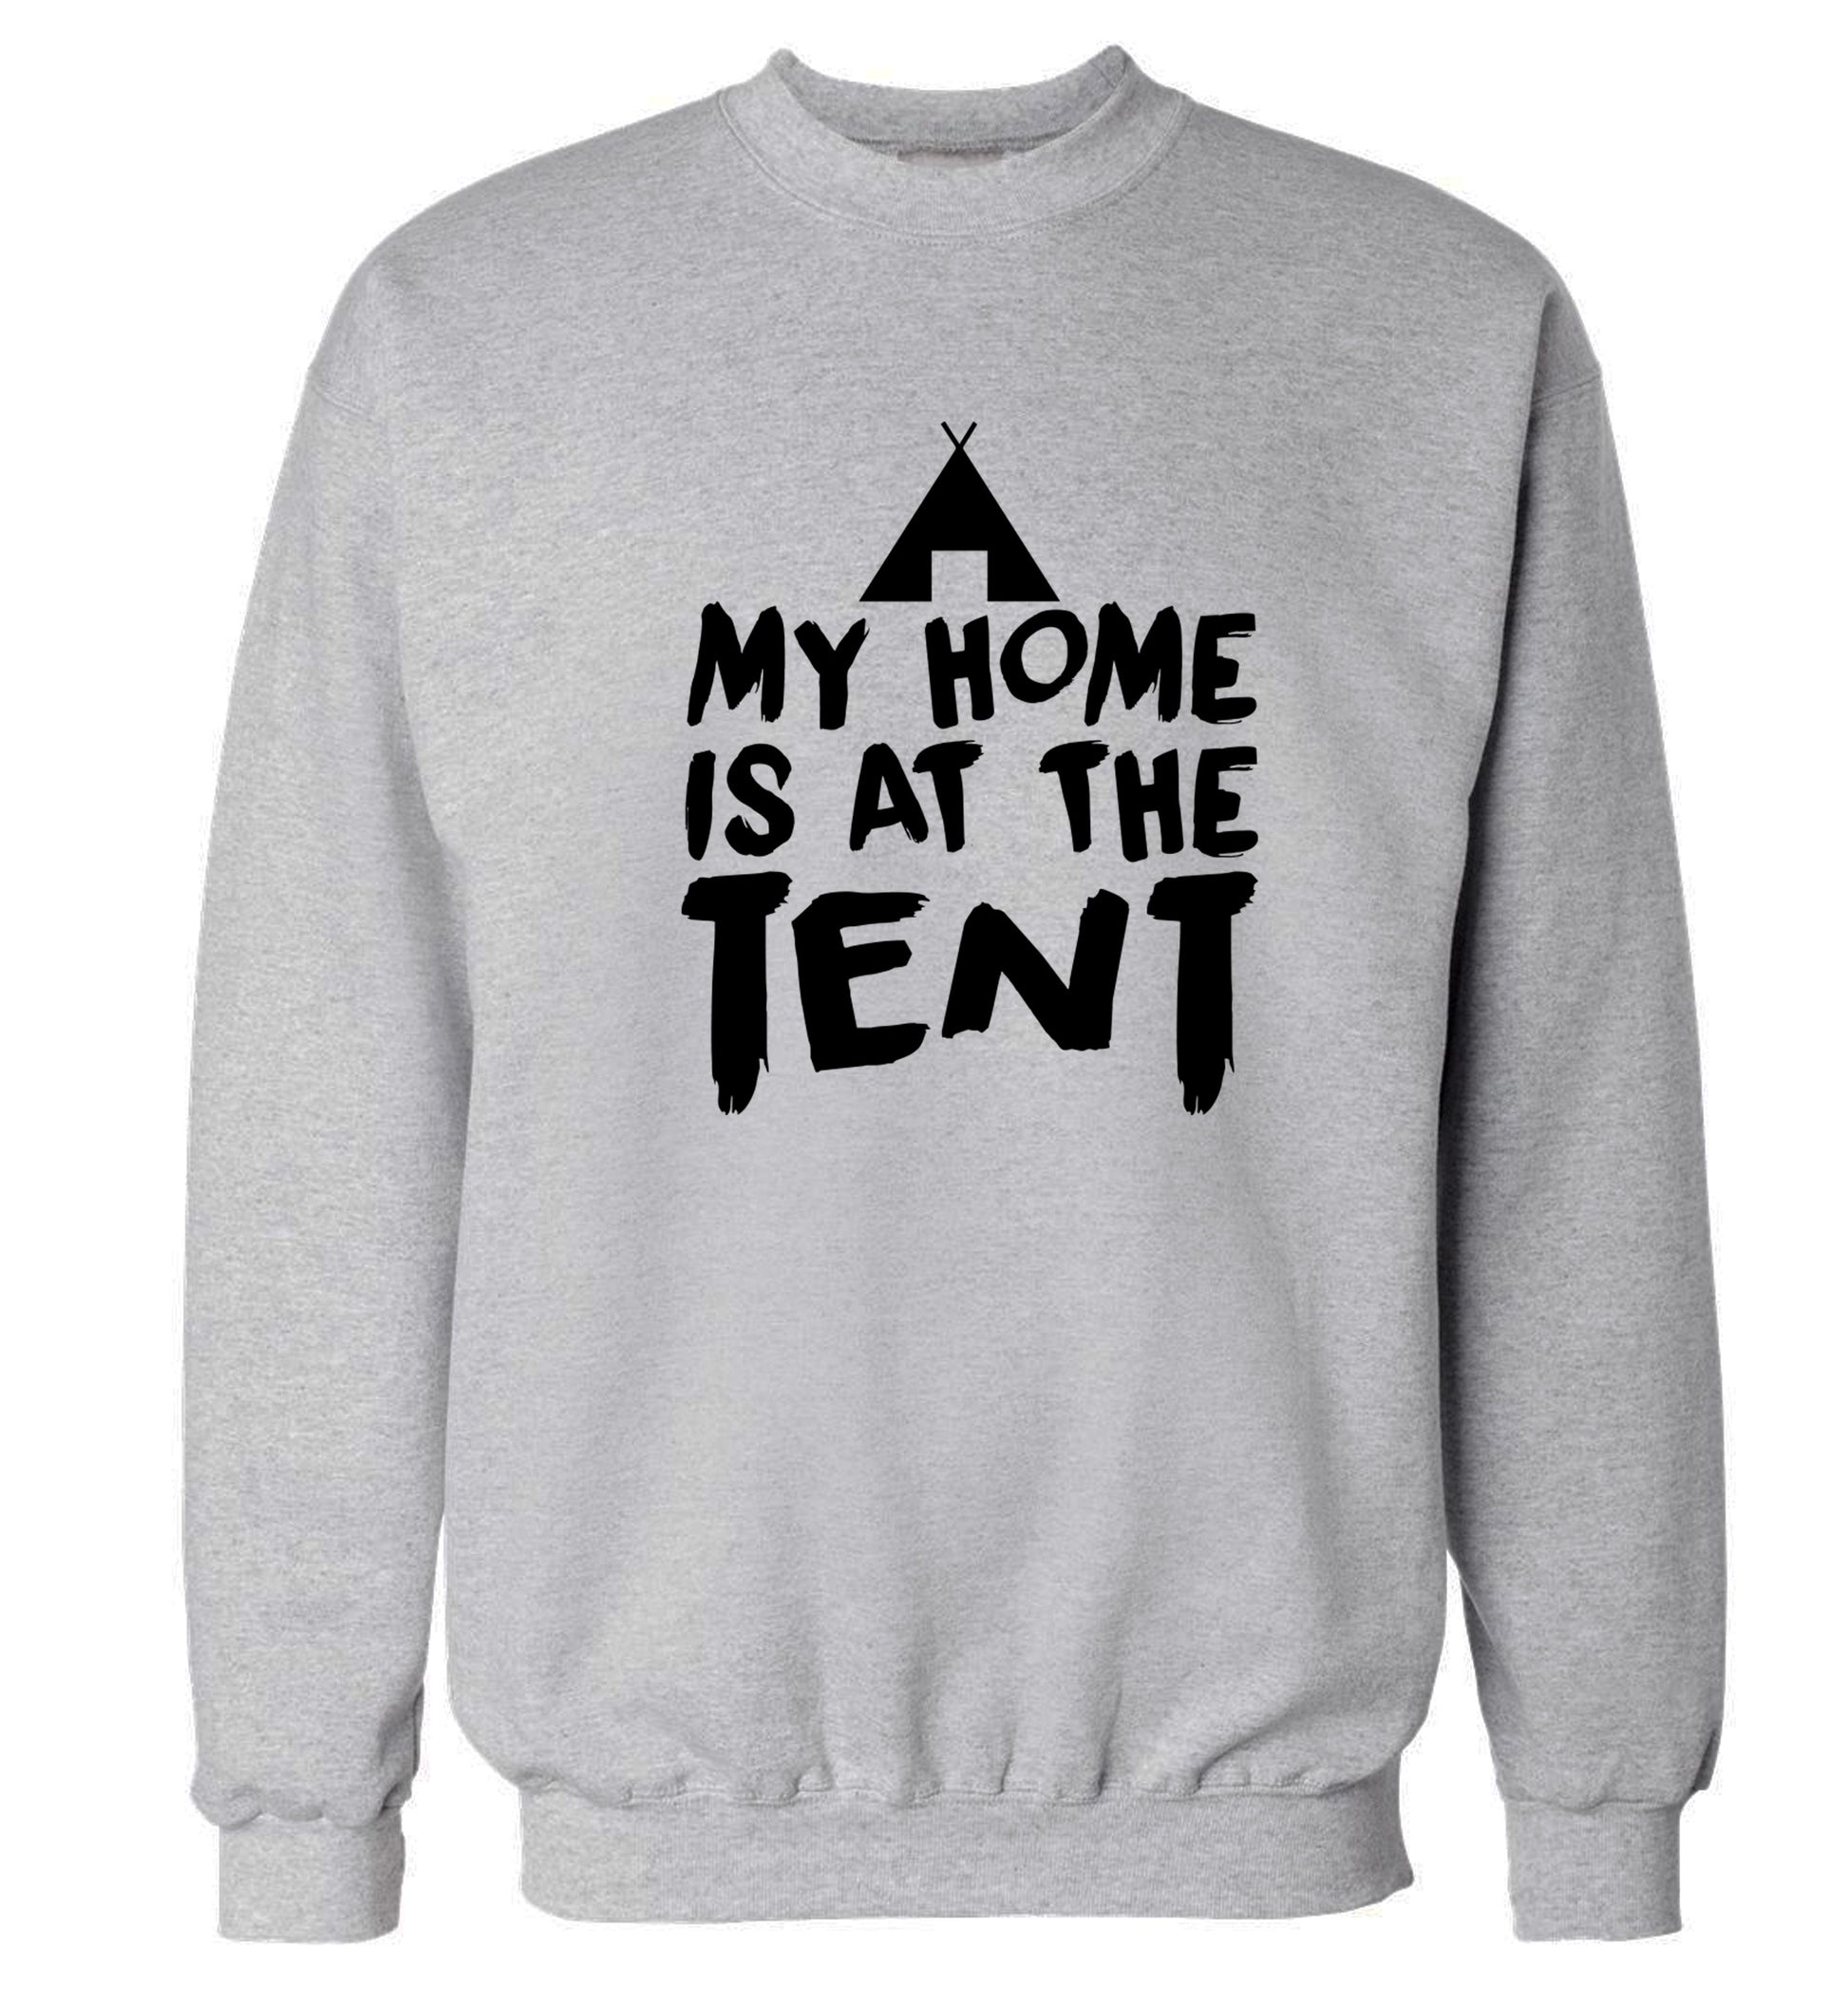 My home is at the tent Adult's unisex grey Sweater 2XL